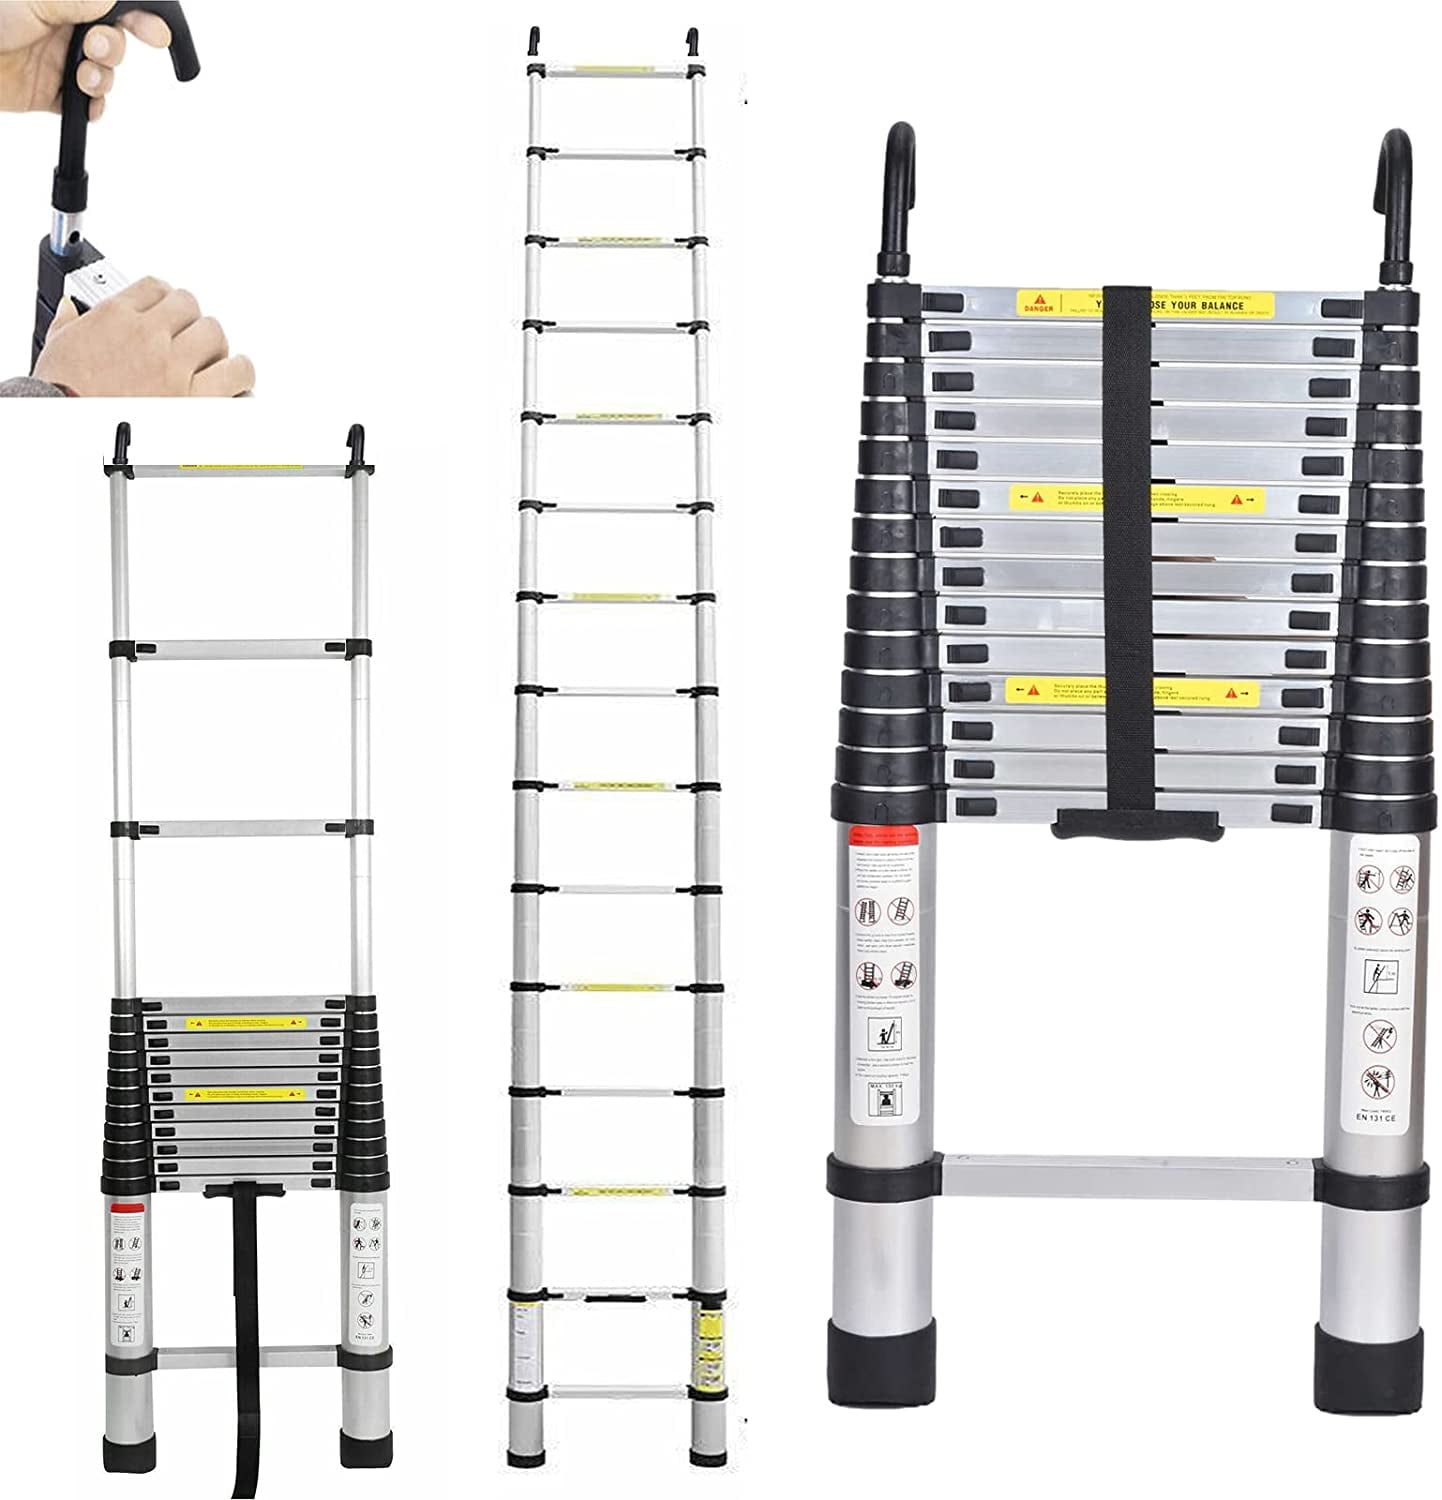 Adjustable Height Extension Ladder Independent Locking Device & Slide Button 150kg Max Capacity COSTWAY 3.8M Aluminum Telescoping Ladder with Carrying Strap 